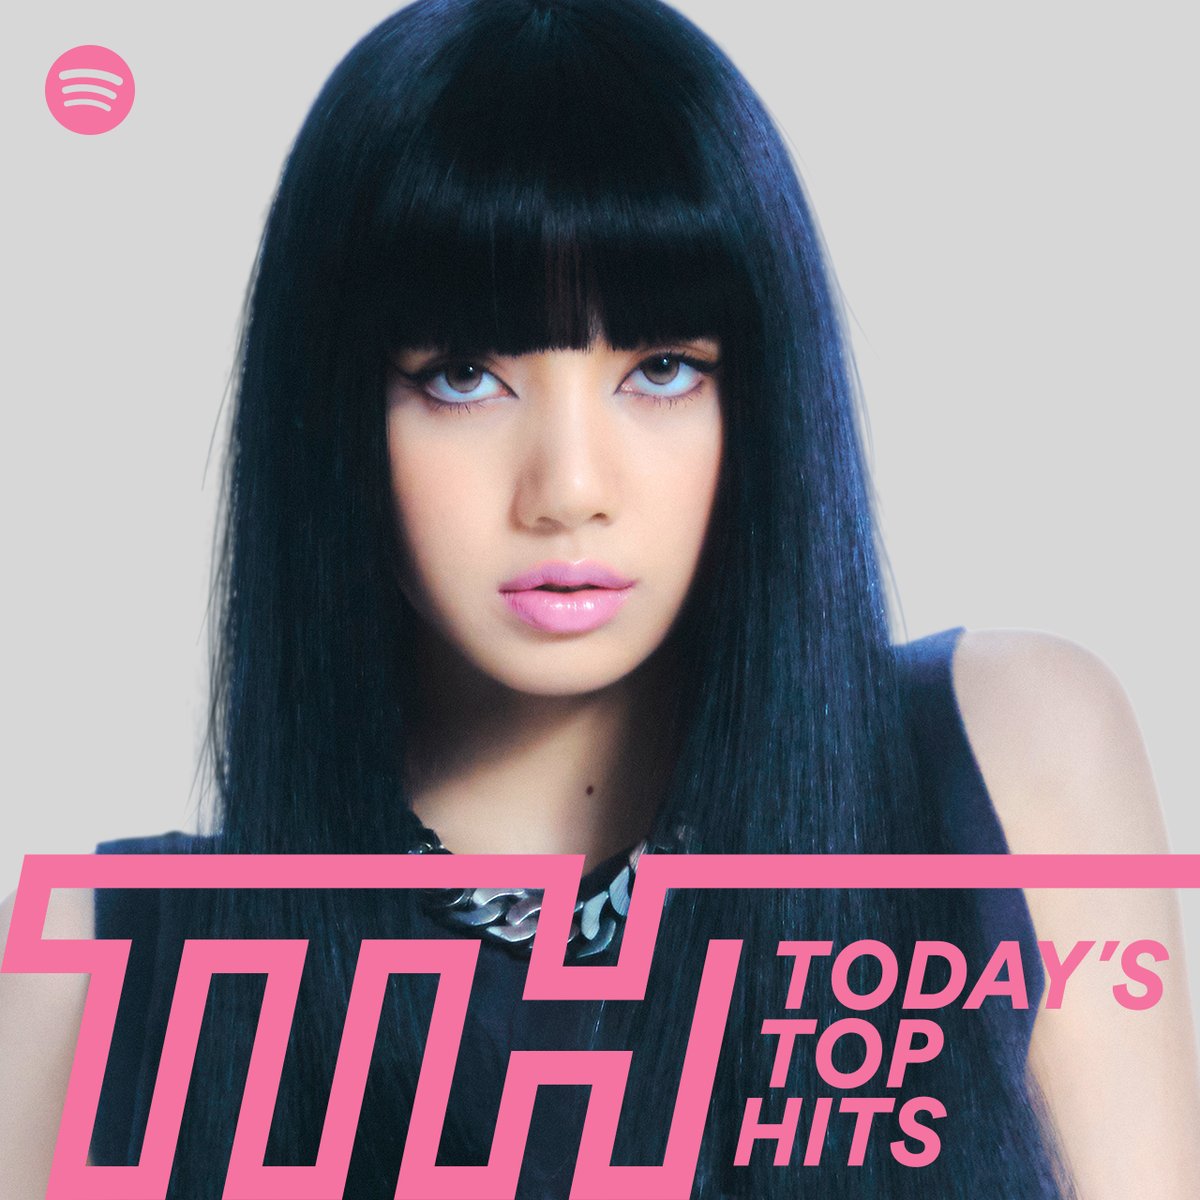 BLACKPINKOFFICIAL on Twitter: "LISA is on the cover Today's Top Hits @spotify! https://t.co/6XgIXORXUk https://t.co/90s3zmnYm8" / Twitter